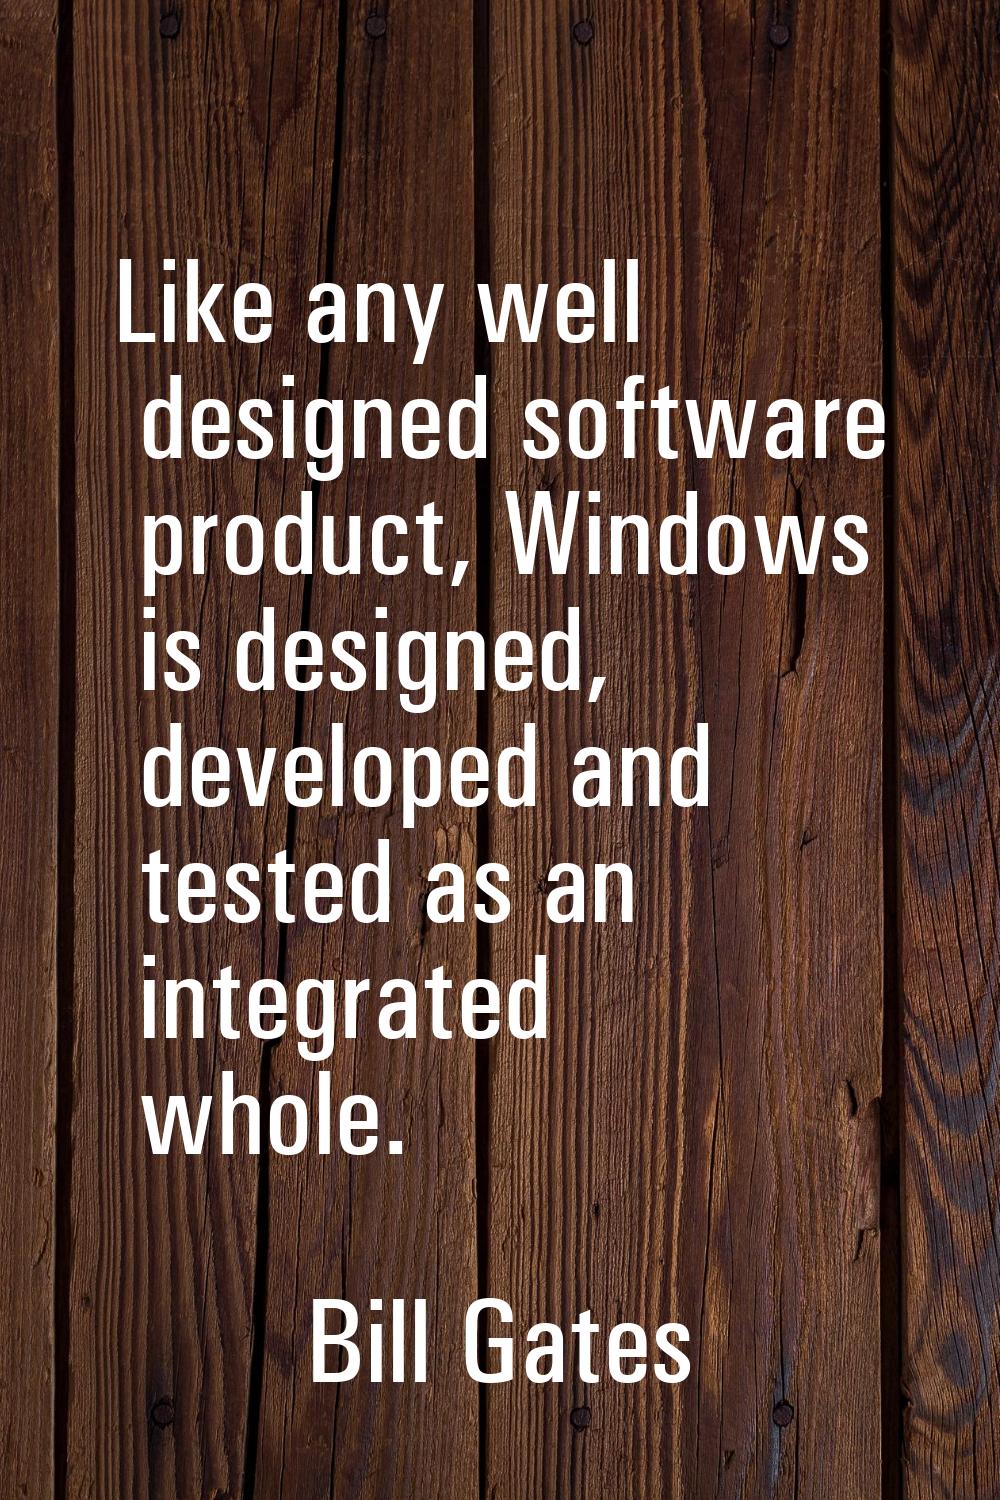 Like any well designed software product, Windows is designed, developed and tested as an integrated